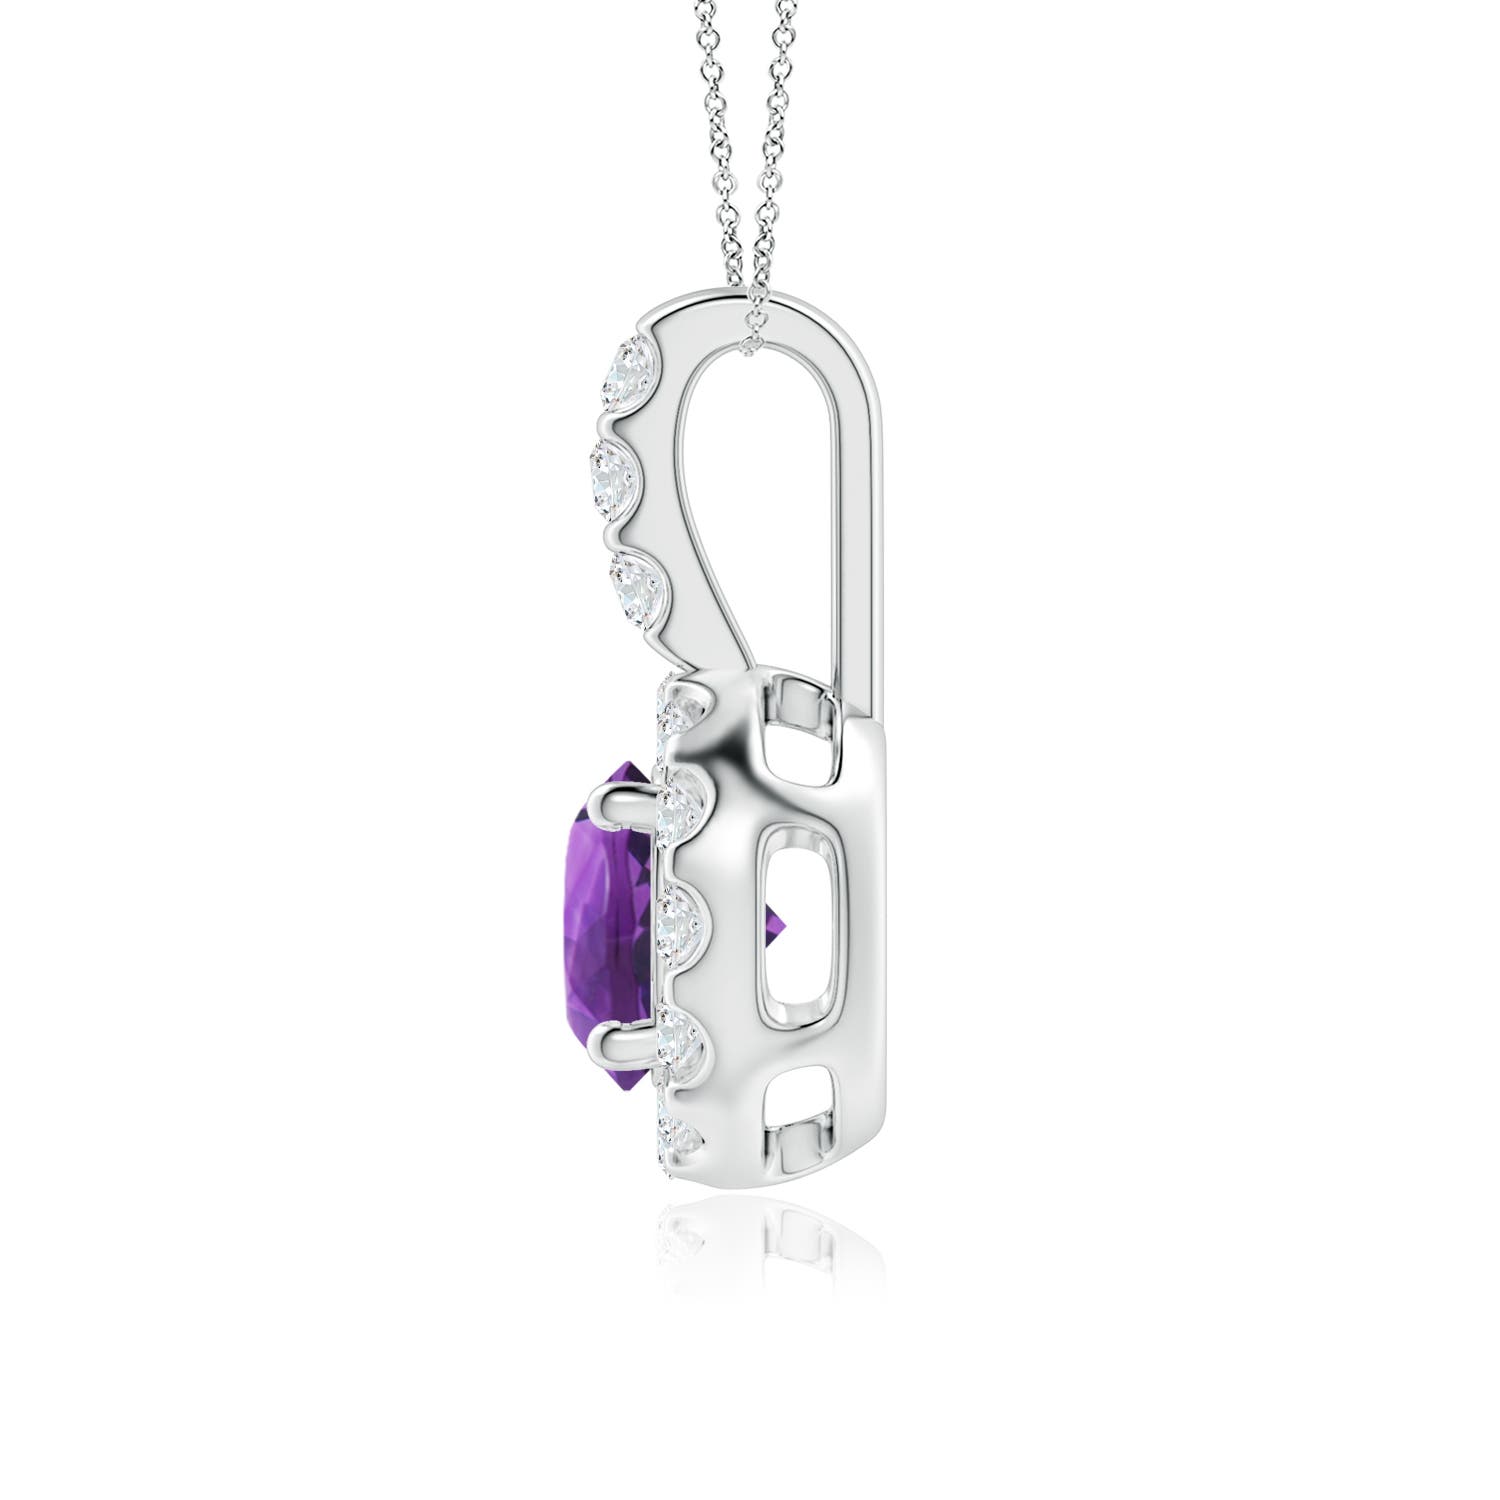 AAA - Amethyst / 1.07 CT / 14 KT White Gold